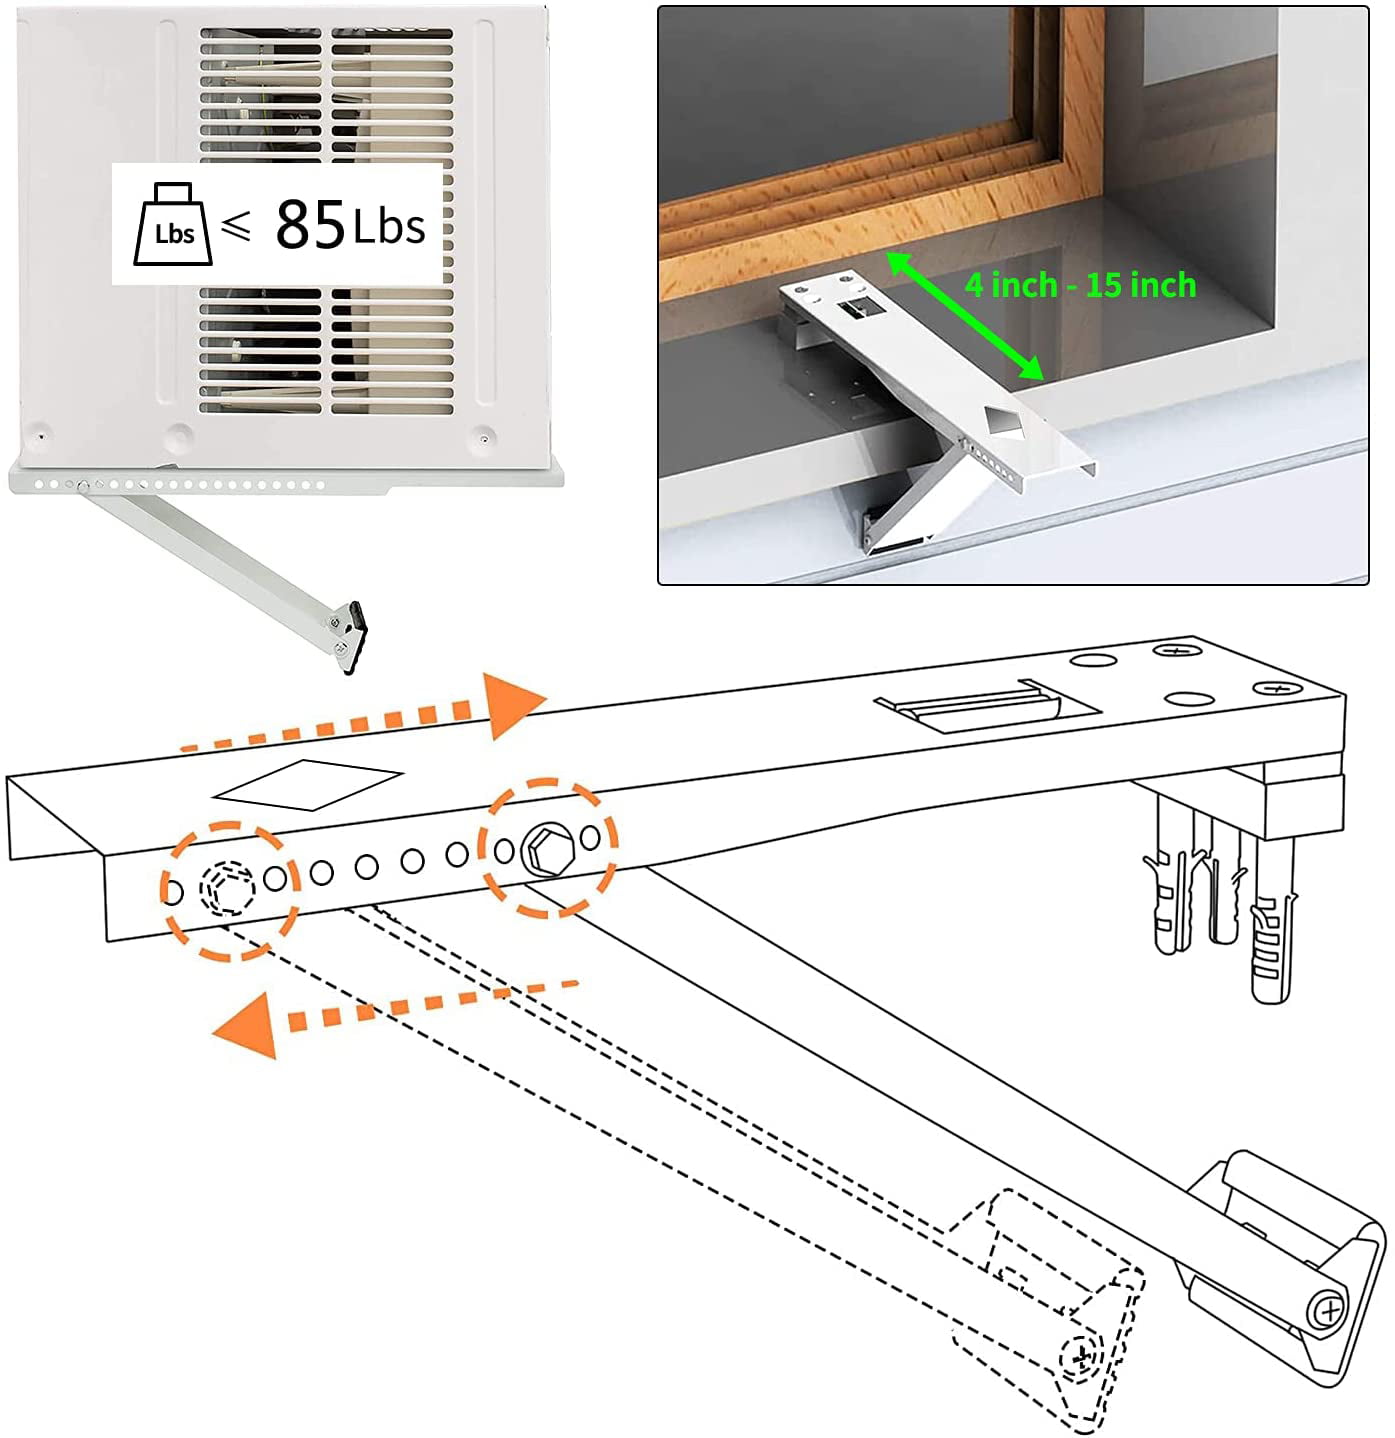 Window Air Conditioner Support Bracket,Relieves Weight Stress On The Window Frame A/C Safe Support Bracket Installs From Inside the House Built-in bubble level window AC Mount Bracket up to 85lbs